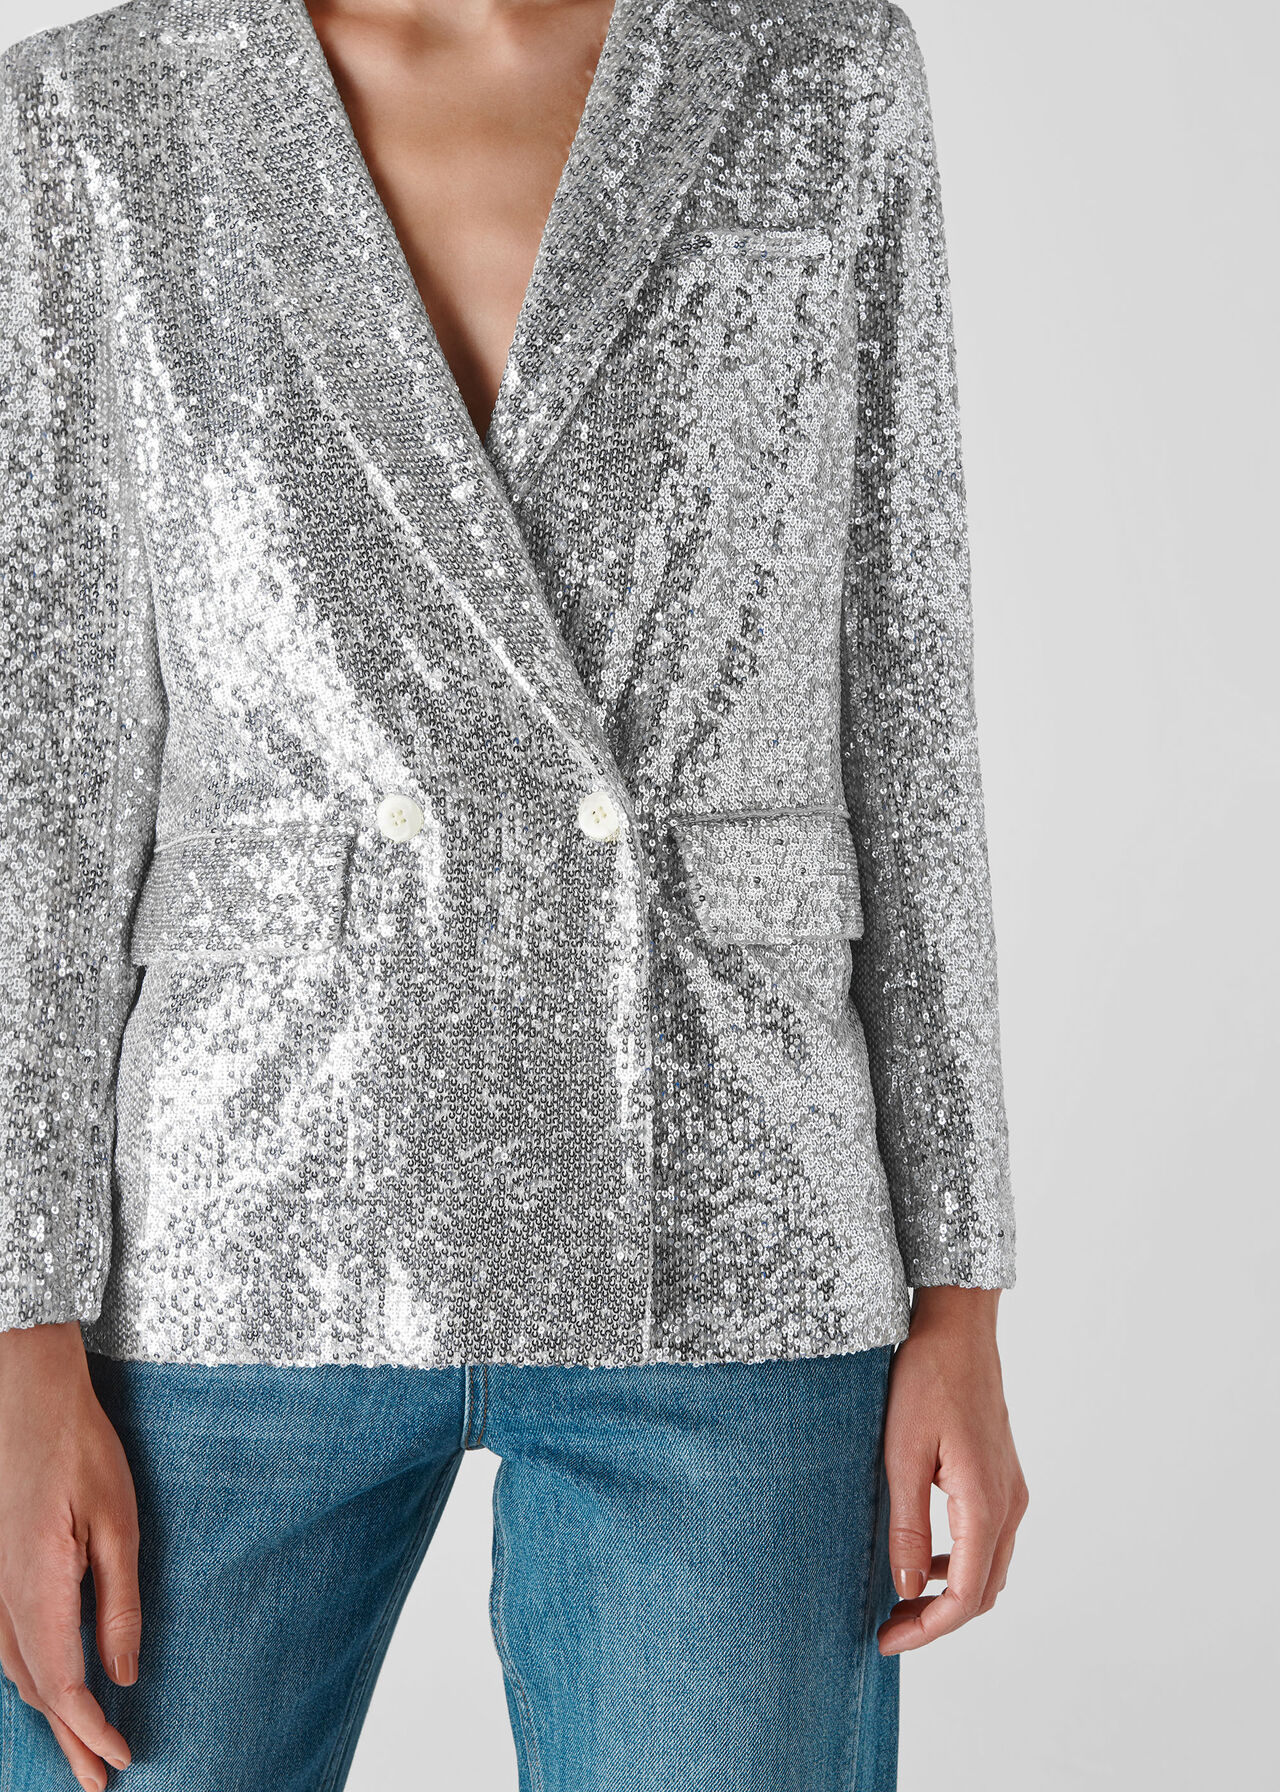 Silver Sequin Double Breasted Blazer | WHISTLES | Whistles